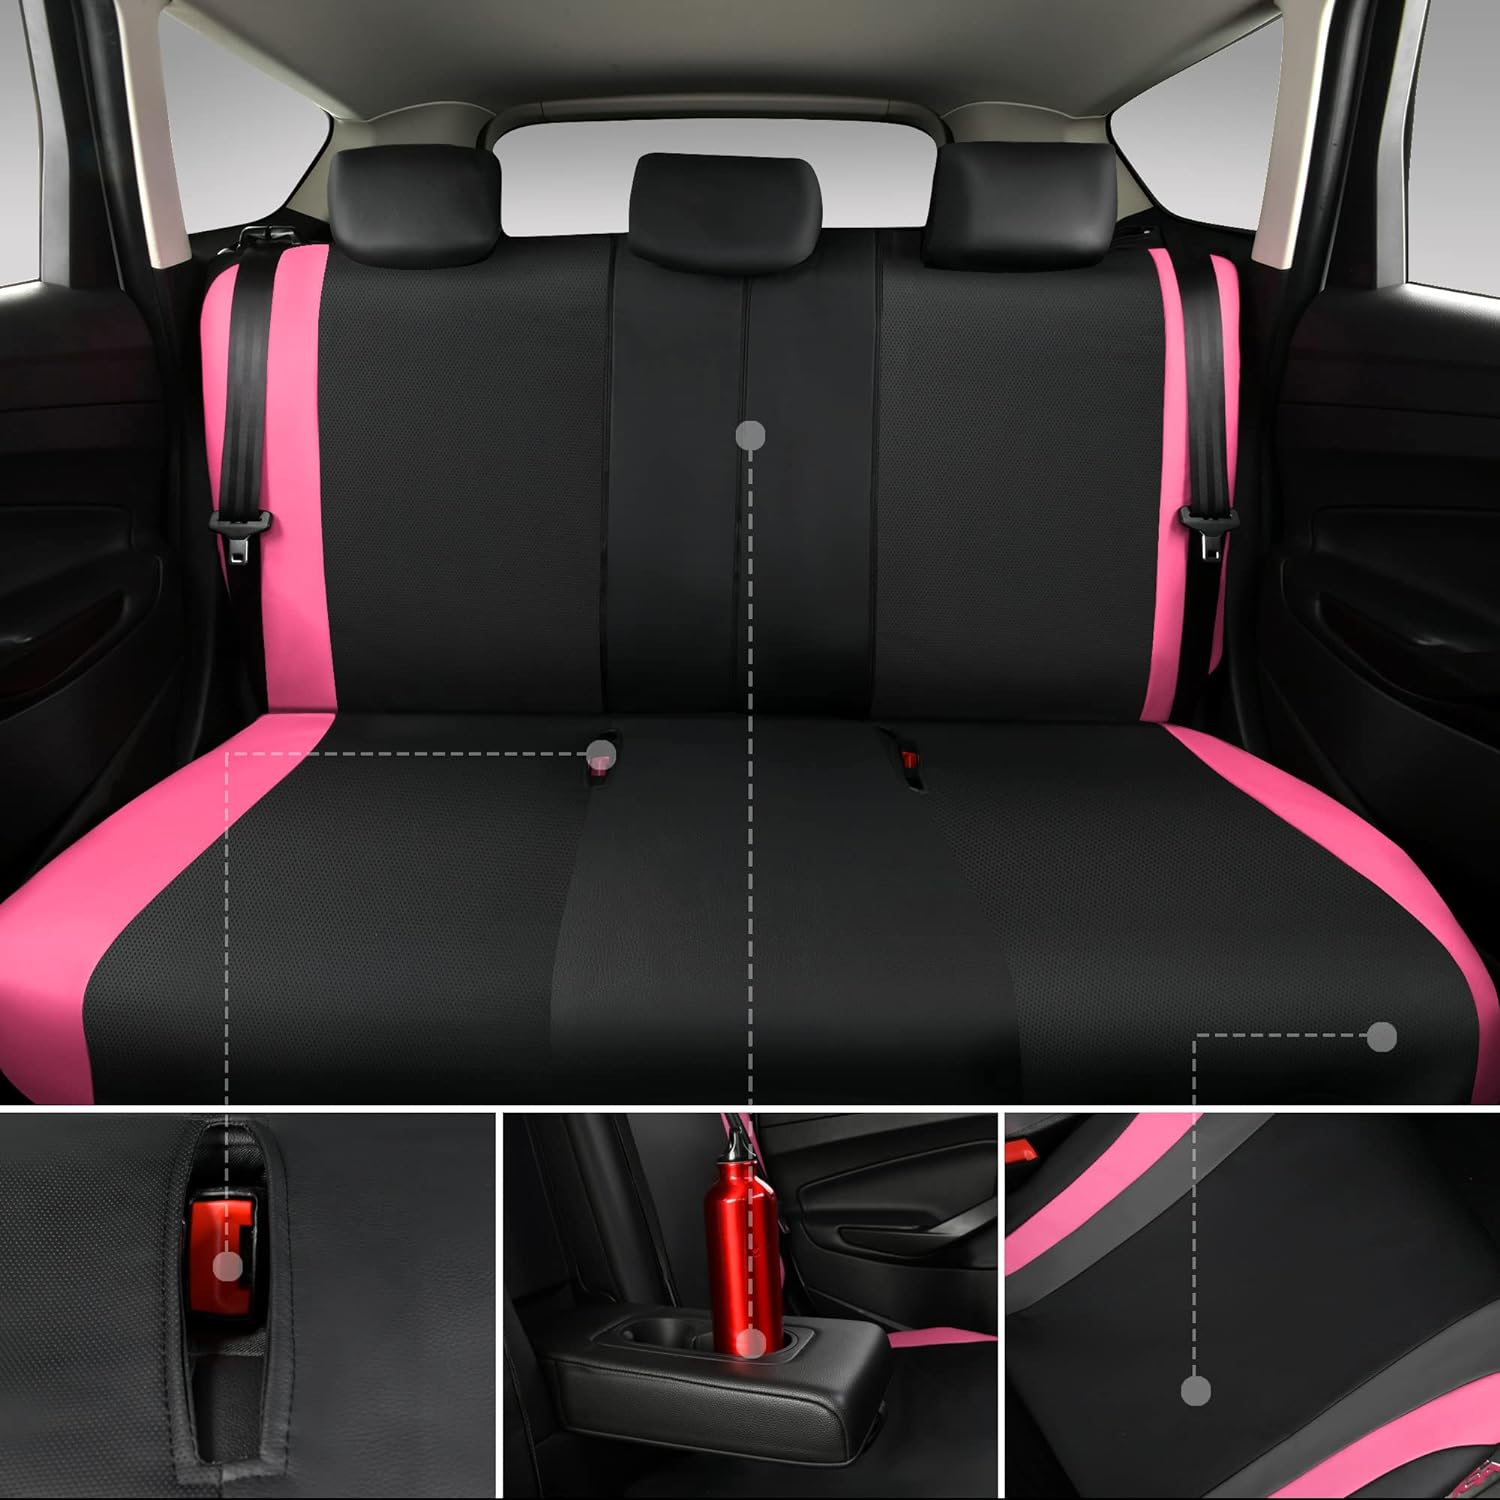 CAR PASS Leather Car Seat Covers Full Set,Waterproof Automotive Seat Covers for Cars SUV Sedan Truck,Airbag Compatible,5mm Composite Sponge,Sporty Universal Fit for Cute Women Girl (Black Purple)